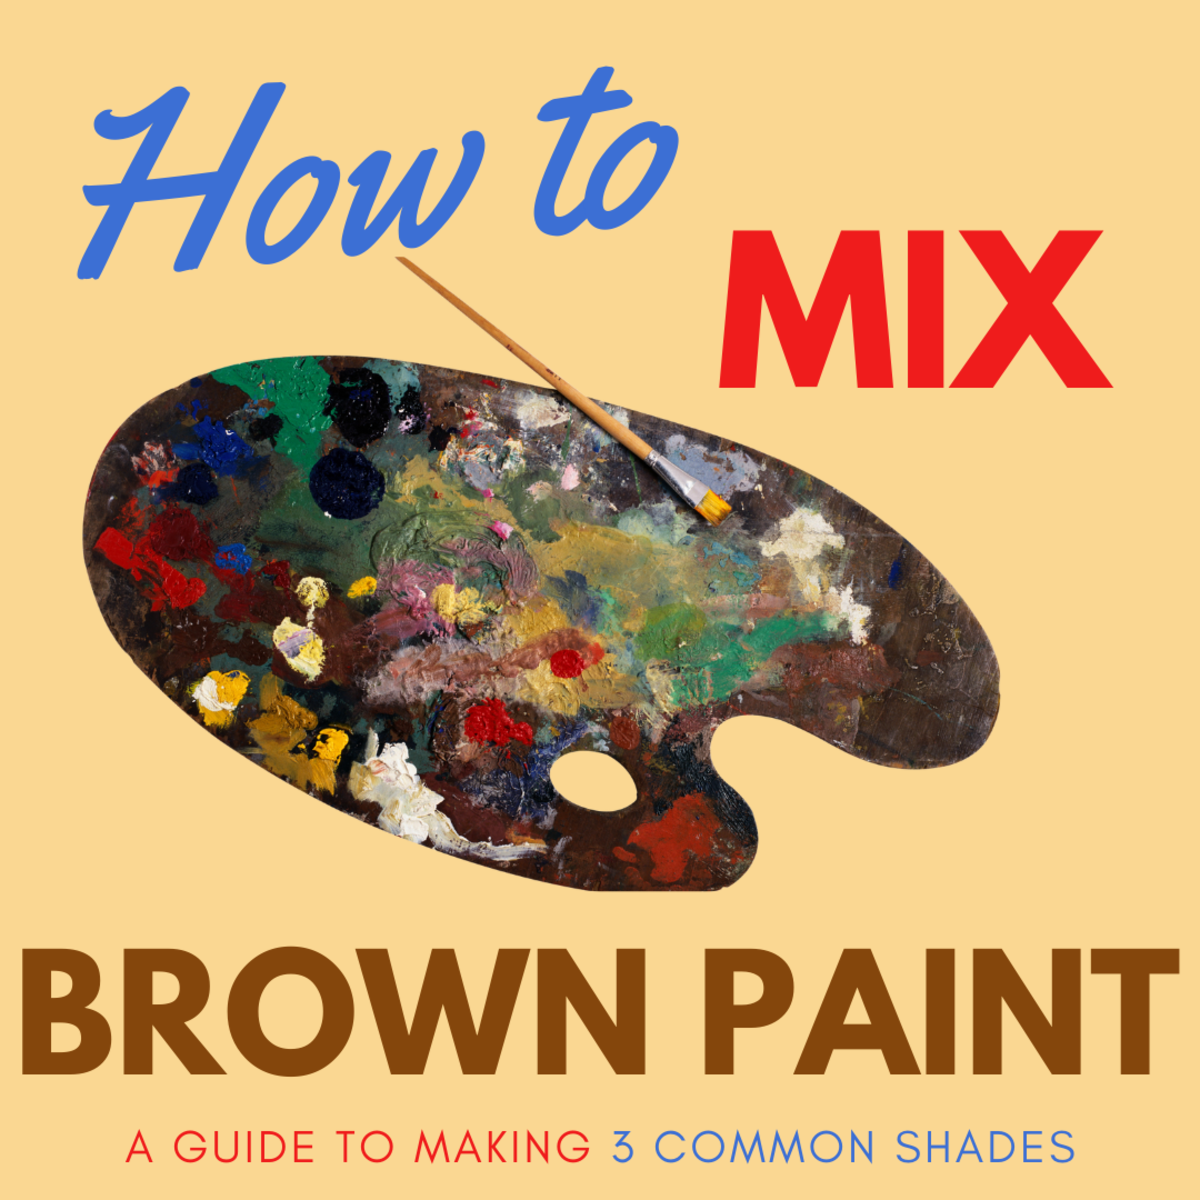 How to Make Brown Paint (3 Common Shades)